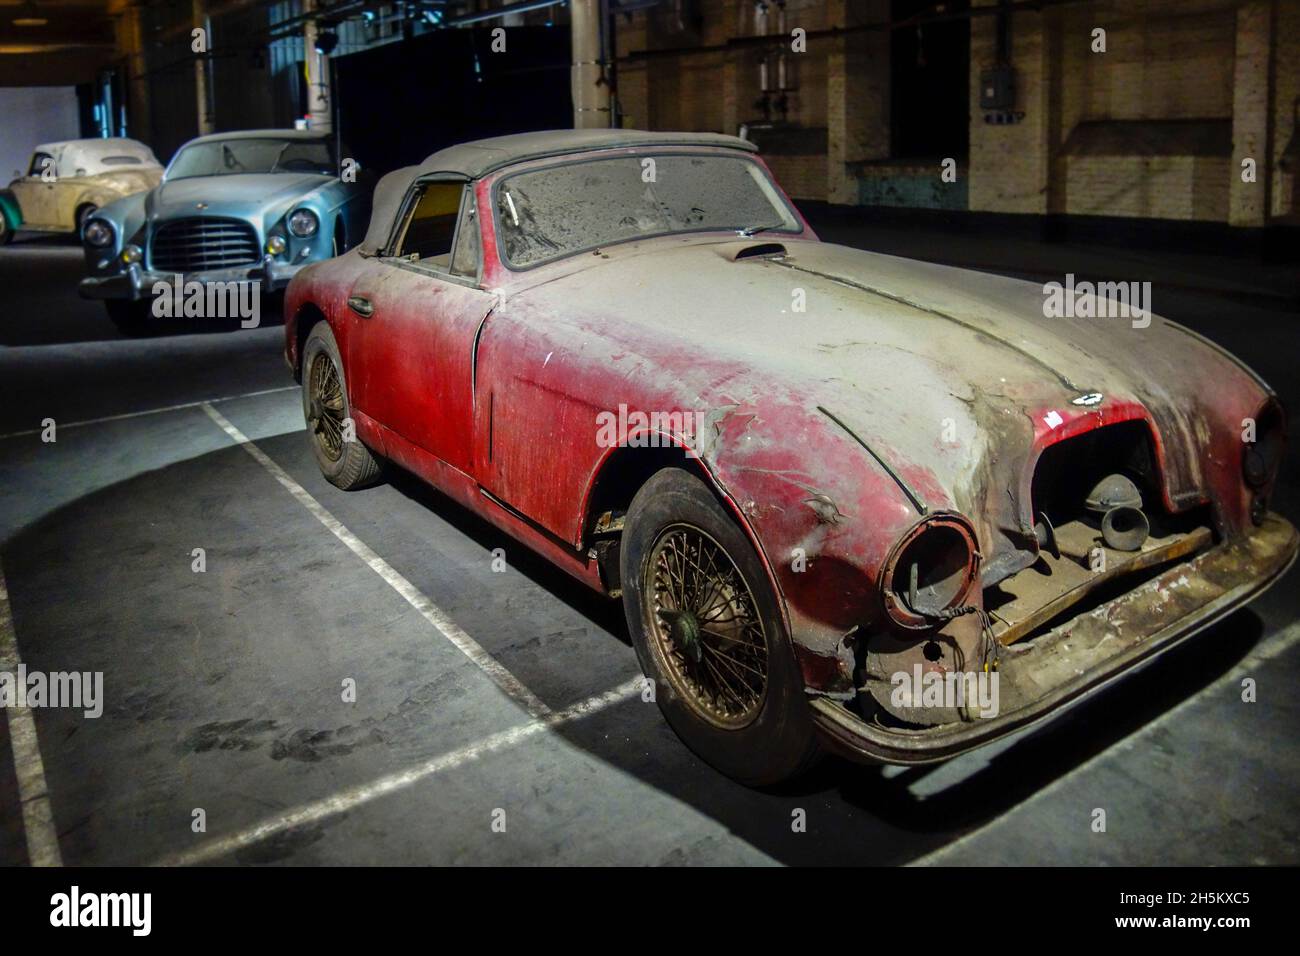 Rusty and dusty 1953 Aston Martin DB2, 2-seat drophead coupé, British classic sports car / oldtimer, in bad shape ready to be restored in garage Stock Photo